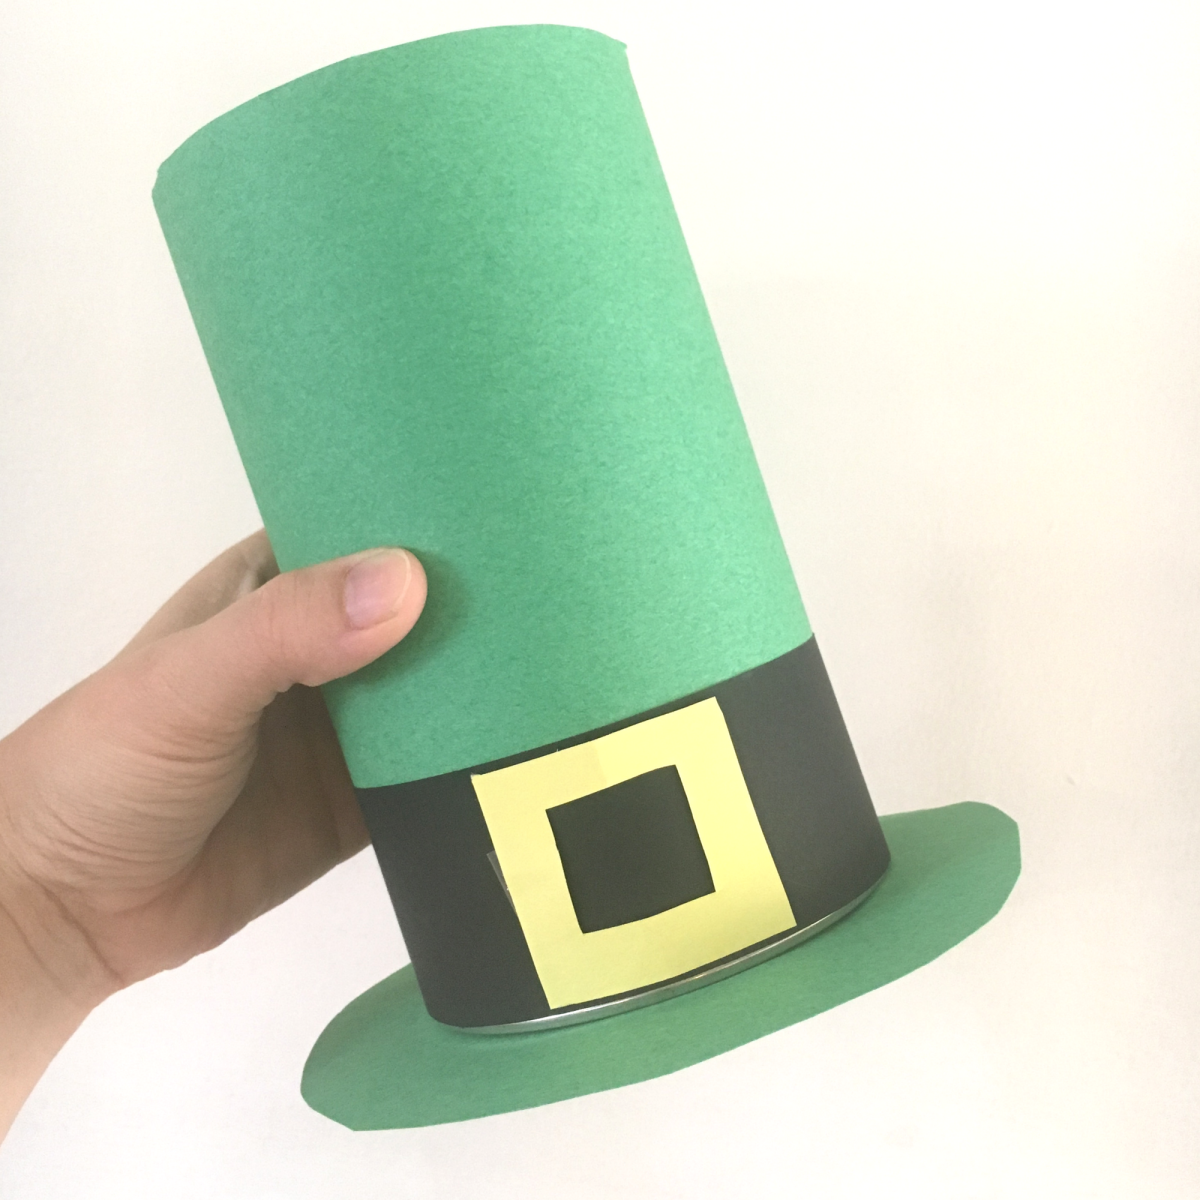 Make this Leprechaun Trap for Kids to set out the night before St. Patrick's Day. The kiddos will enjoy waking up to the leprechaun's tricks.